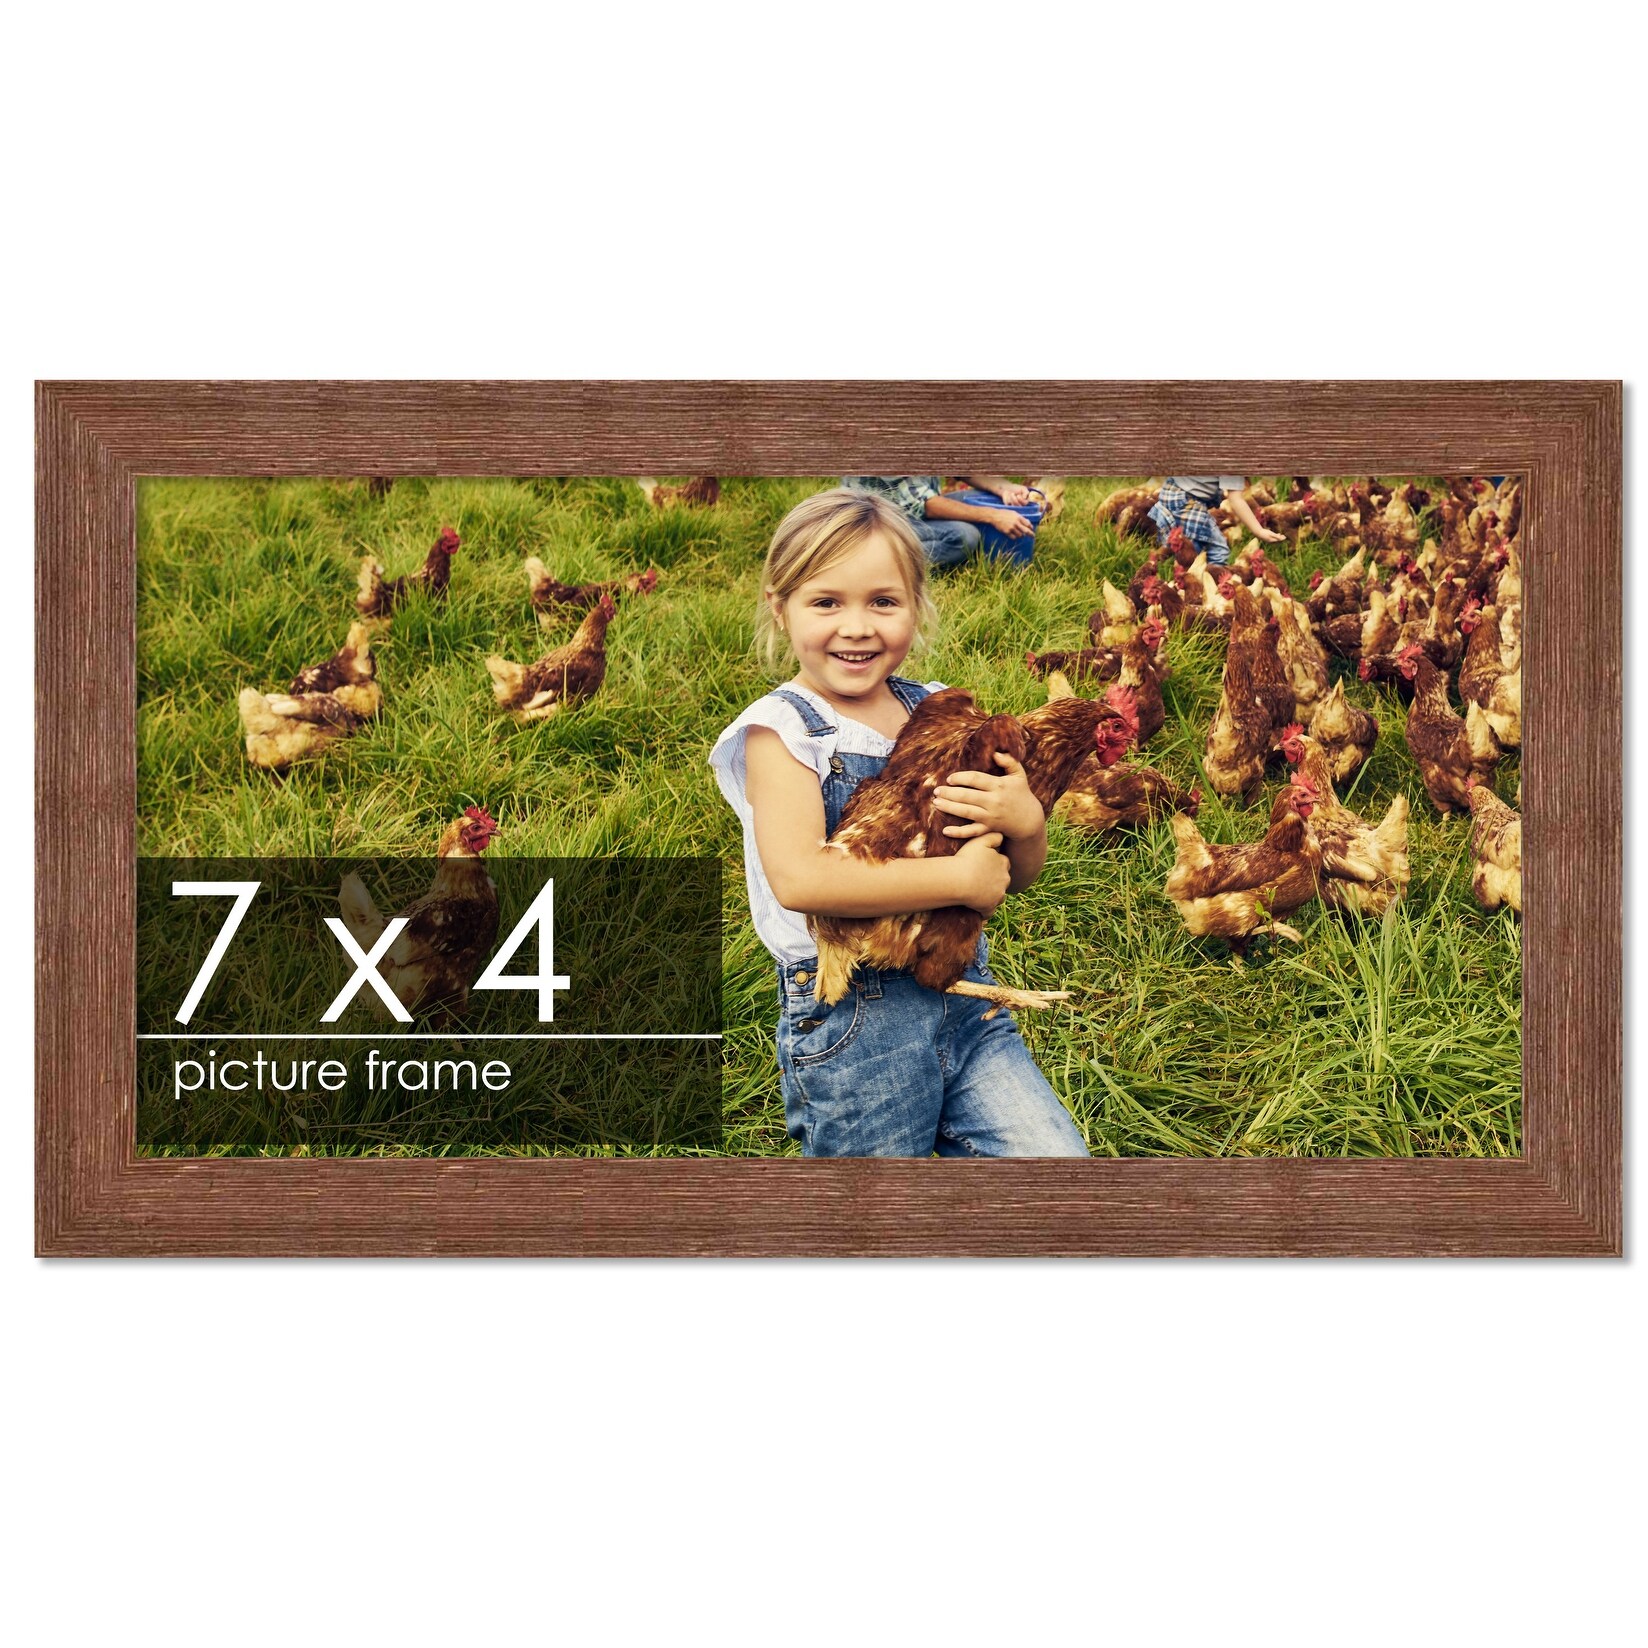 https://ak1.ostkcdn.com/images/products/is/images/direct/3c5dd0fb67c5cac421cf03e0aaed8ba6d75a5e24/7x4-Frame-Brown-Barnwood-Picture-Frame-with-UV-Acrylic-Glass%2C-Foam-Board-Backing-%26-Hanging-Hardware-Included.jpg